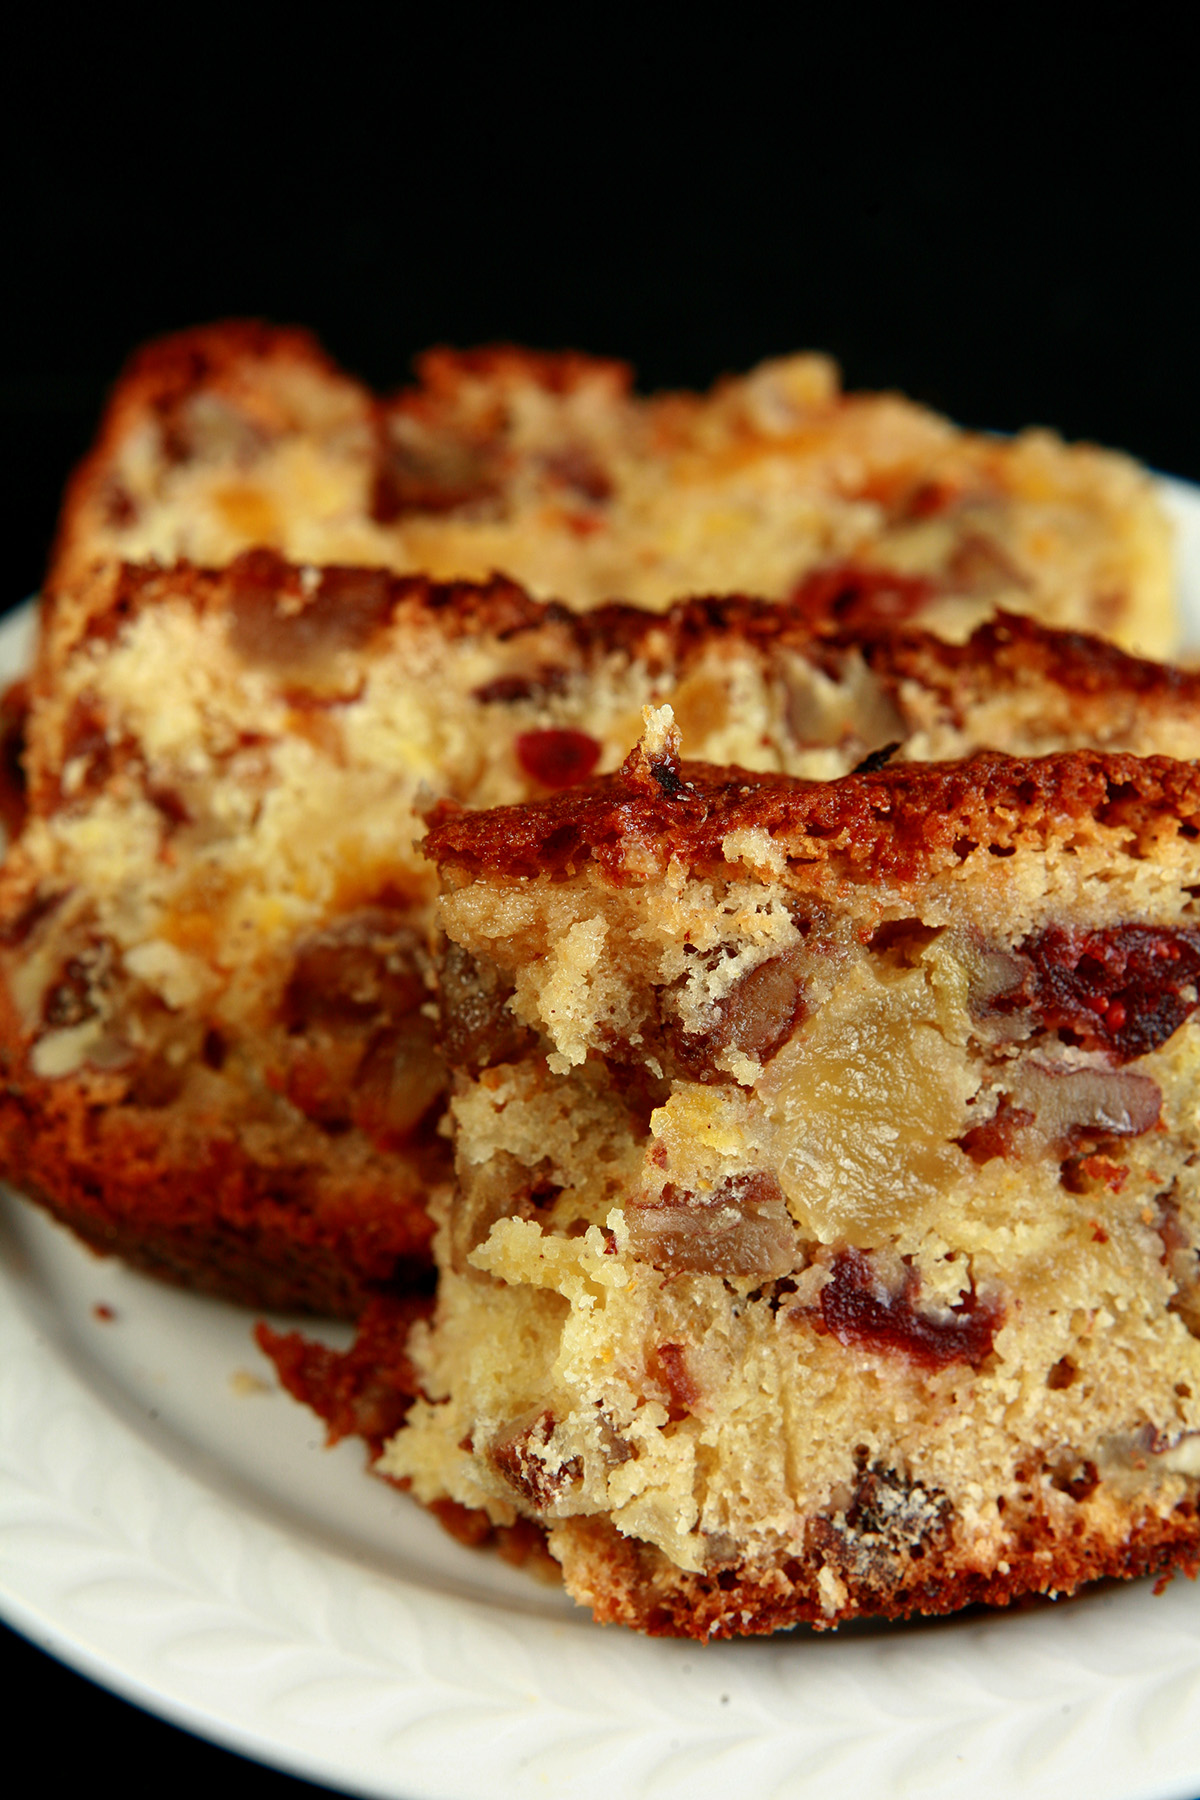 Slices of gluten-free fruitcake, on a small white plate. The cake is generously studded with dried - not candied - fruit.